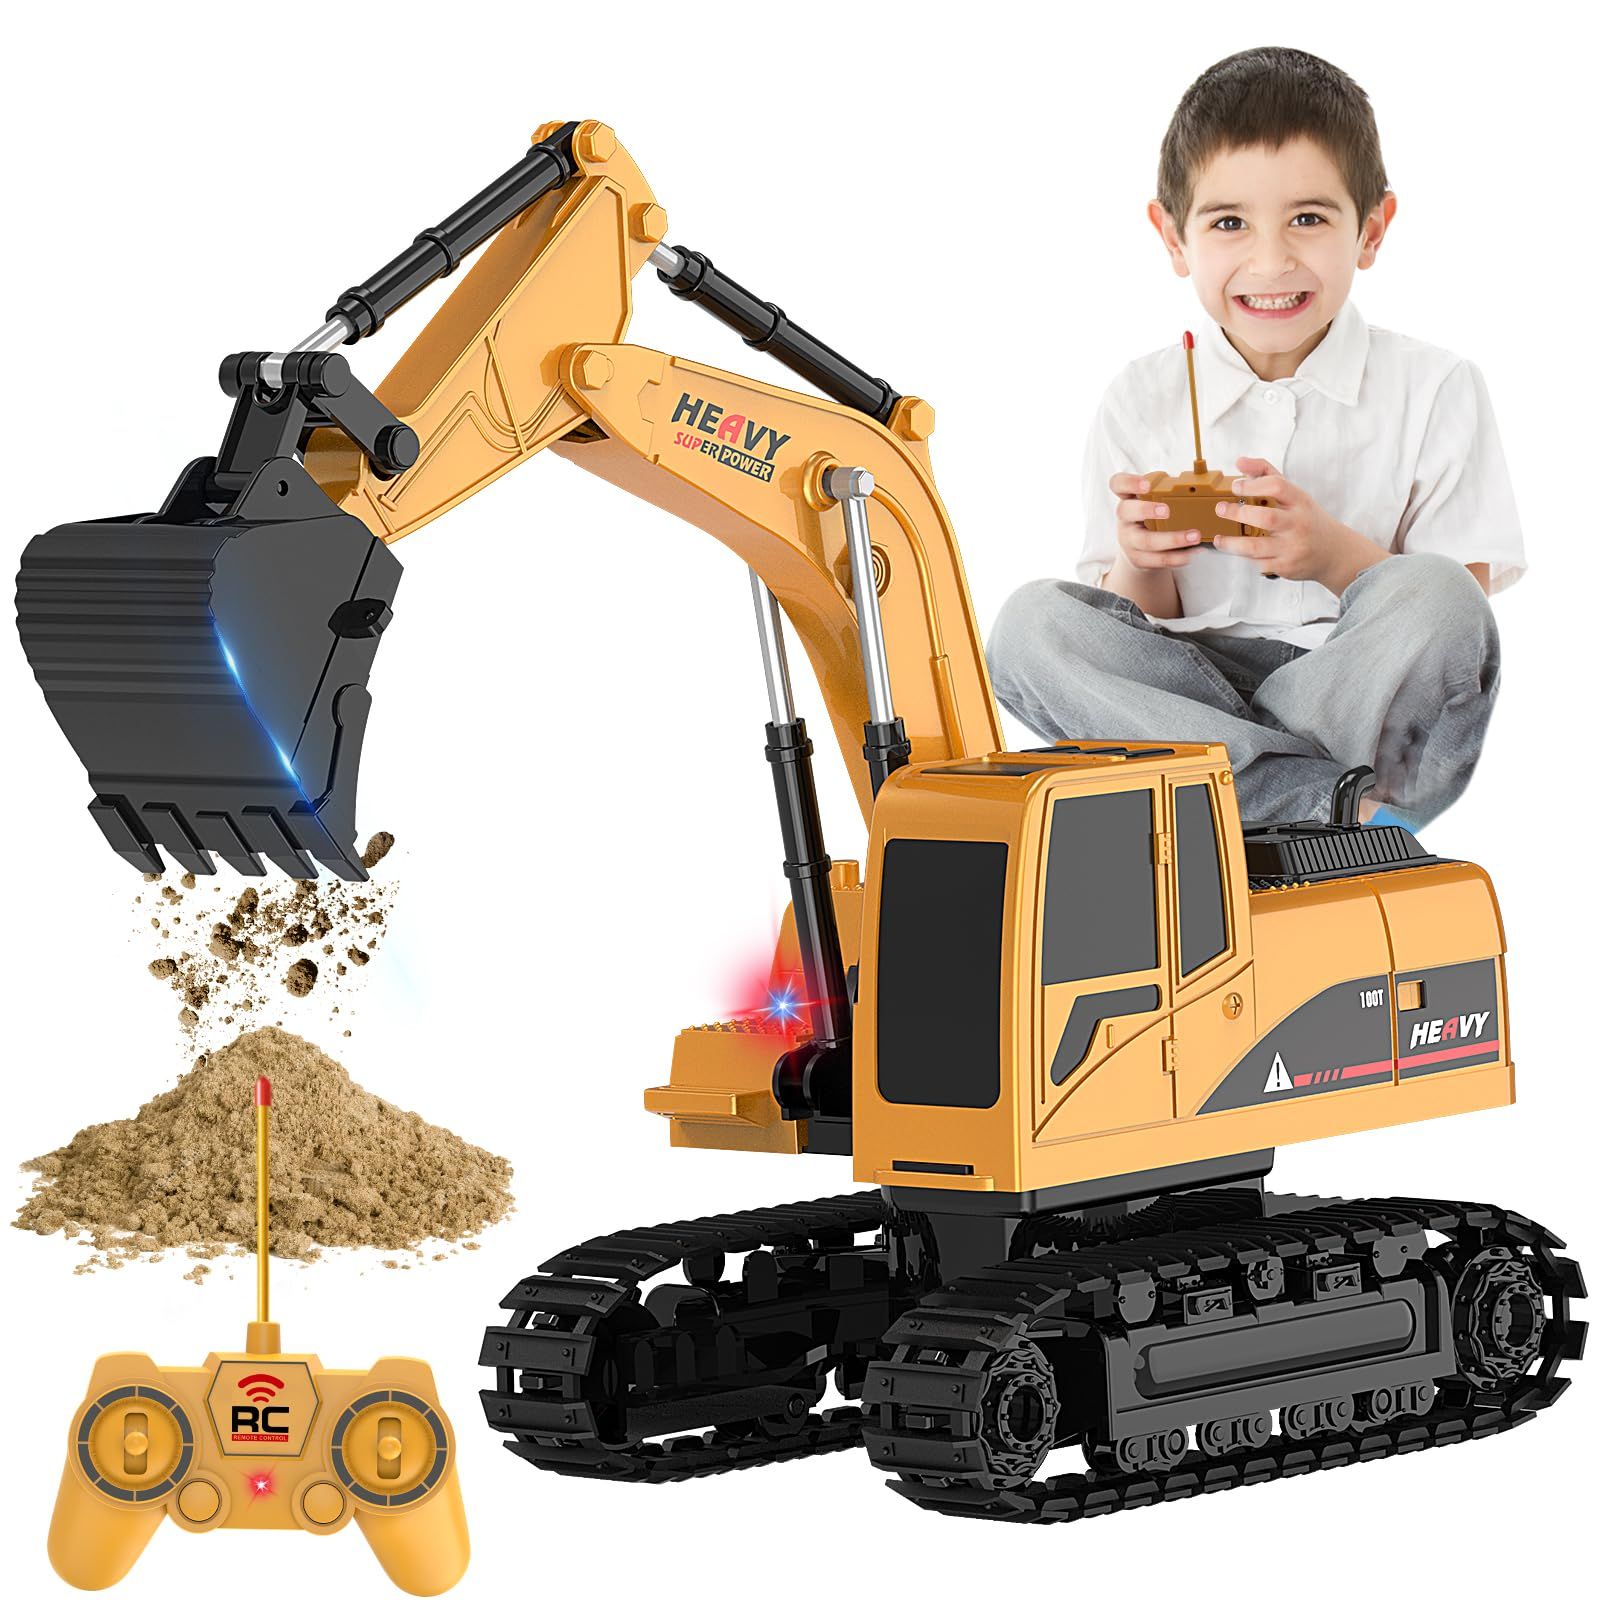 Construction Excavator Toy - Kids Toy Engineering Digger Truck, Remote Control Rechargable Hydraulic | Amazon (US)